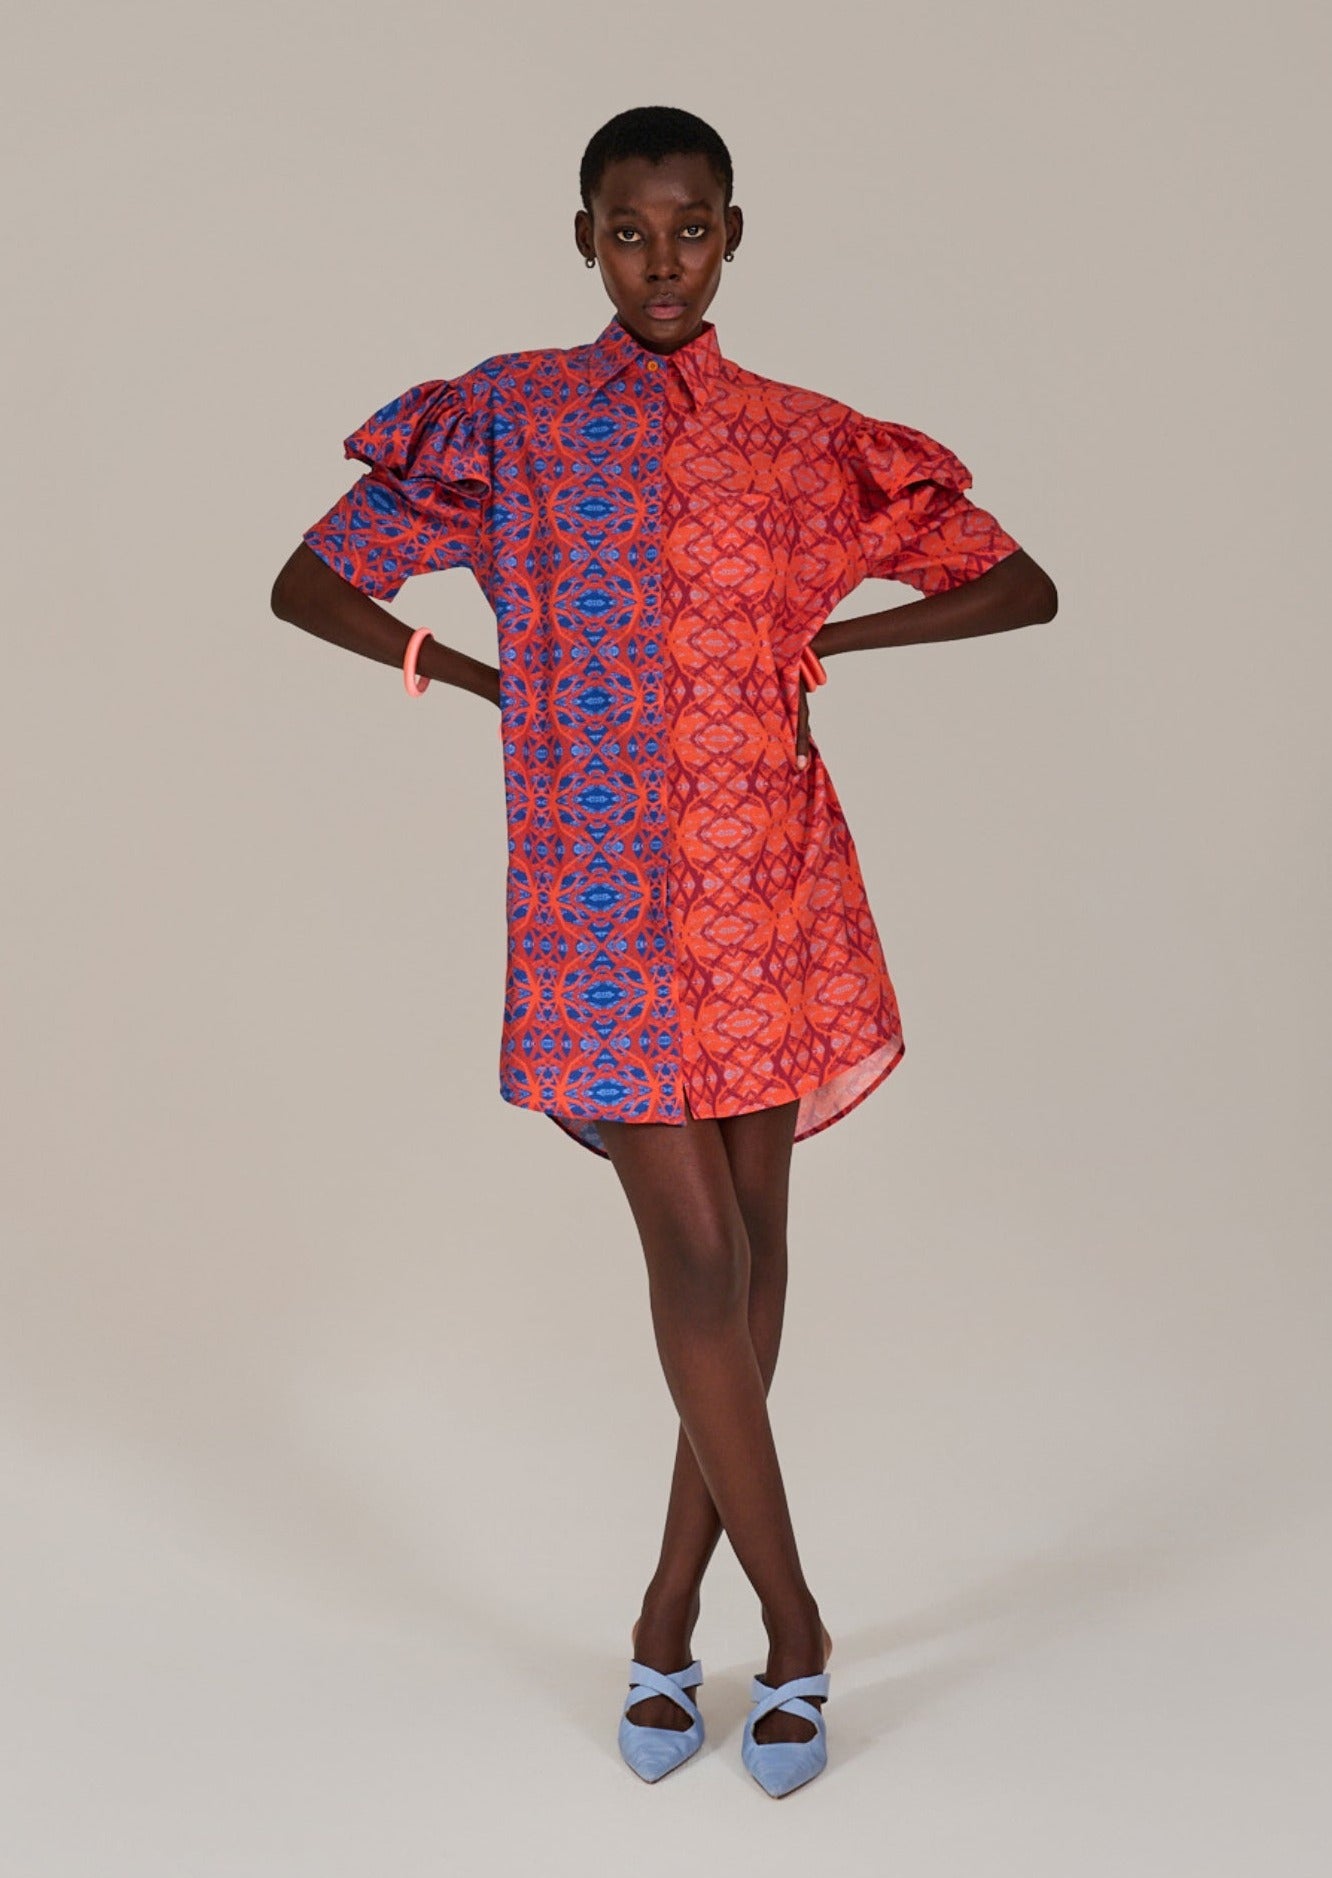 KAHINDO | African-Inspired Fashion | Ethically Made in Kenya